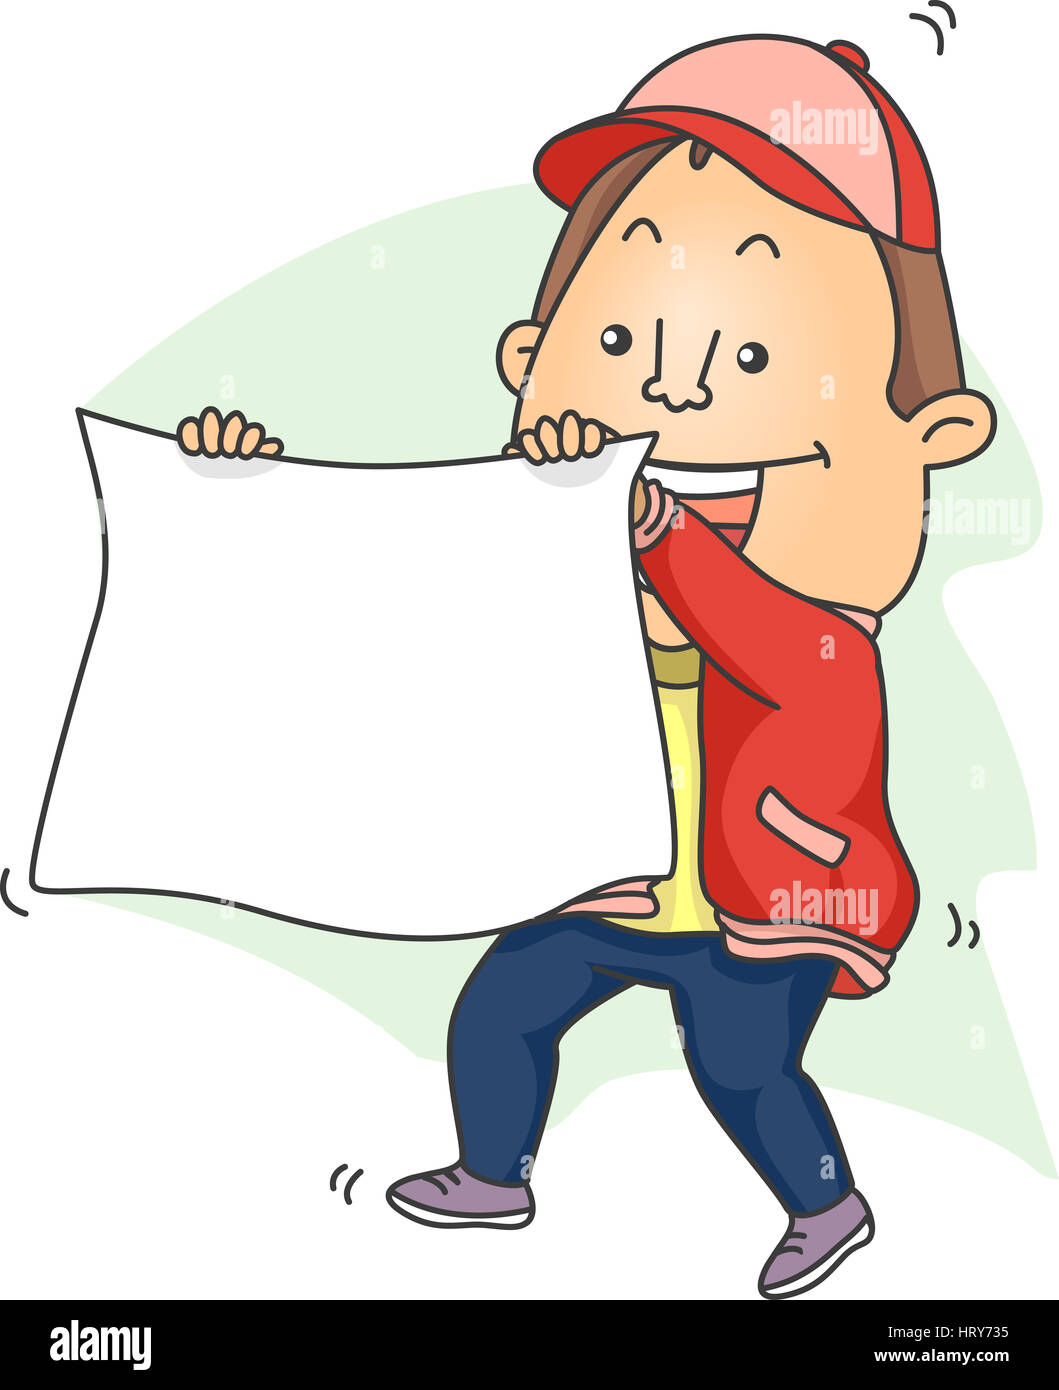 Illustration of a Sports Fan Waving a Blank Banner in Glee Stock Photo